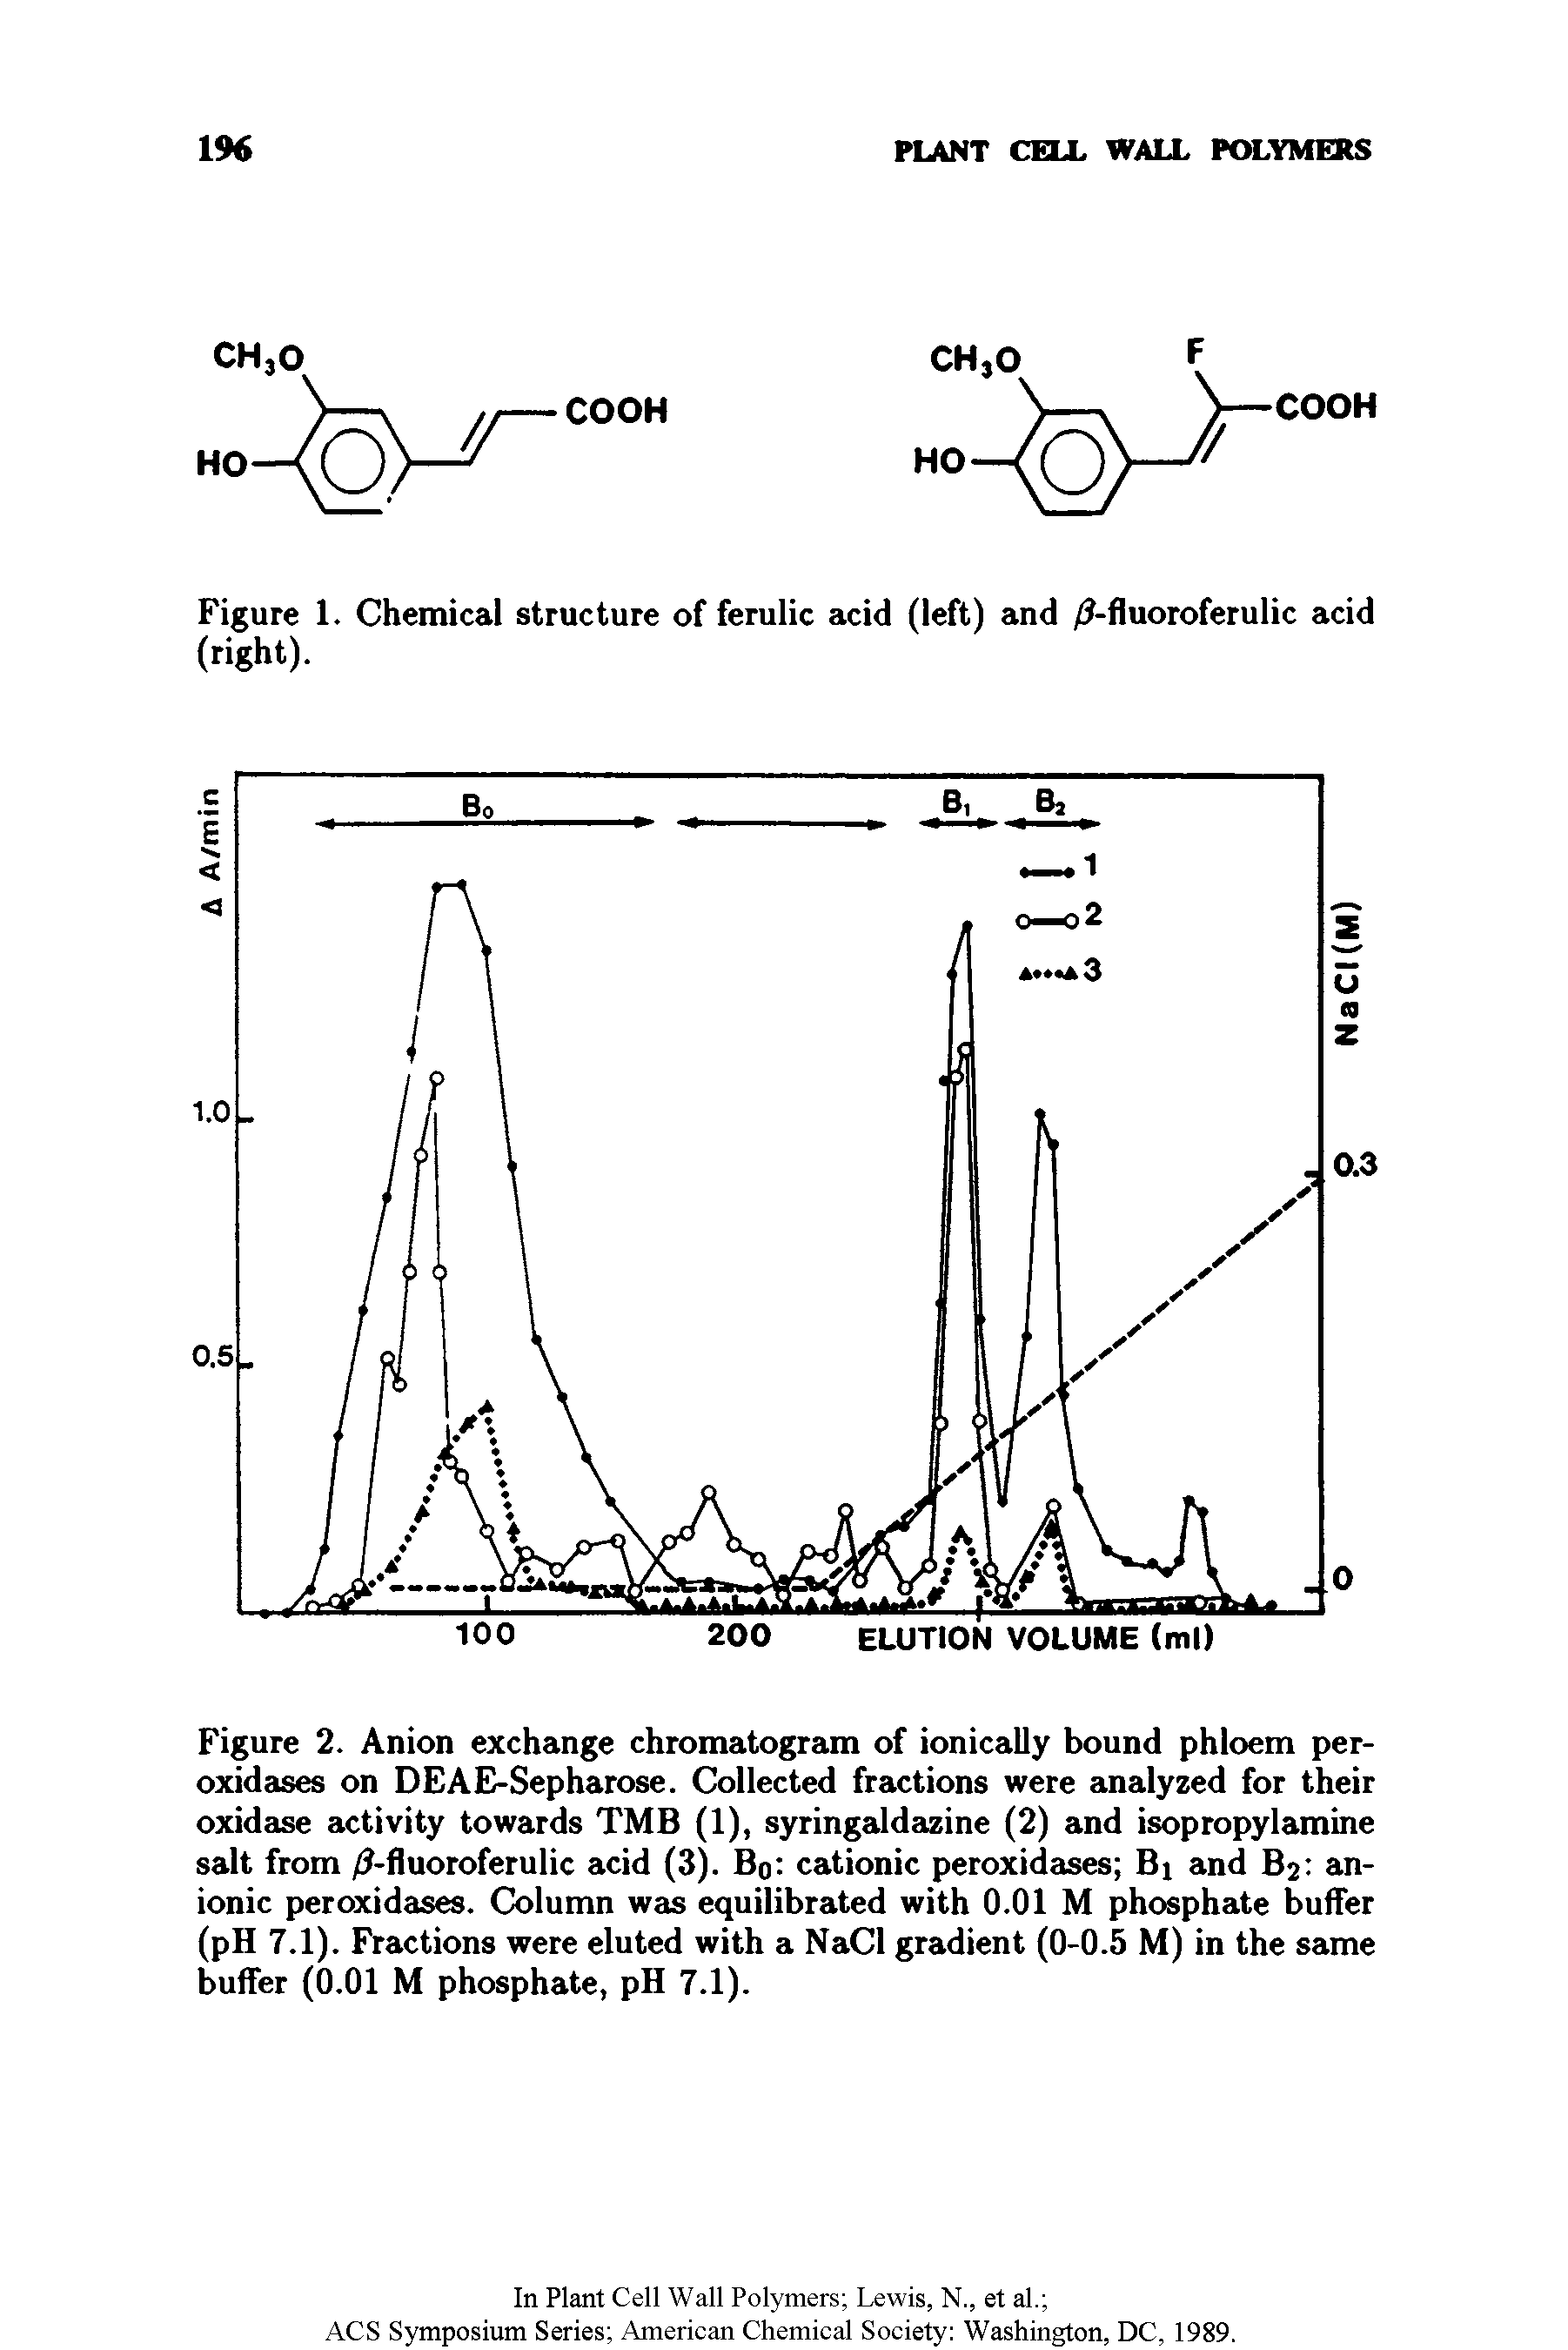 Figure 2. Anion exchange chromatogram of ionically bound phloem peroxidases on DEAE-Sepharose. Collected fractions were analyzed for their oxidase activity towards TMB (1), syringaldazine (2) and isopropylamine salt from / -fluoroferulic acid (3). Bo cationic peroxidases Bj and B2 anionic peroxidases. Column was equilibrated with 0.01 M phosphate buffer (pH 7.1). Fractions were eluted with a NaCl gradient (0-0.5 M) in the same buffer (0.01 M phosphate, pH 7.1).